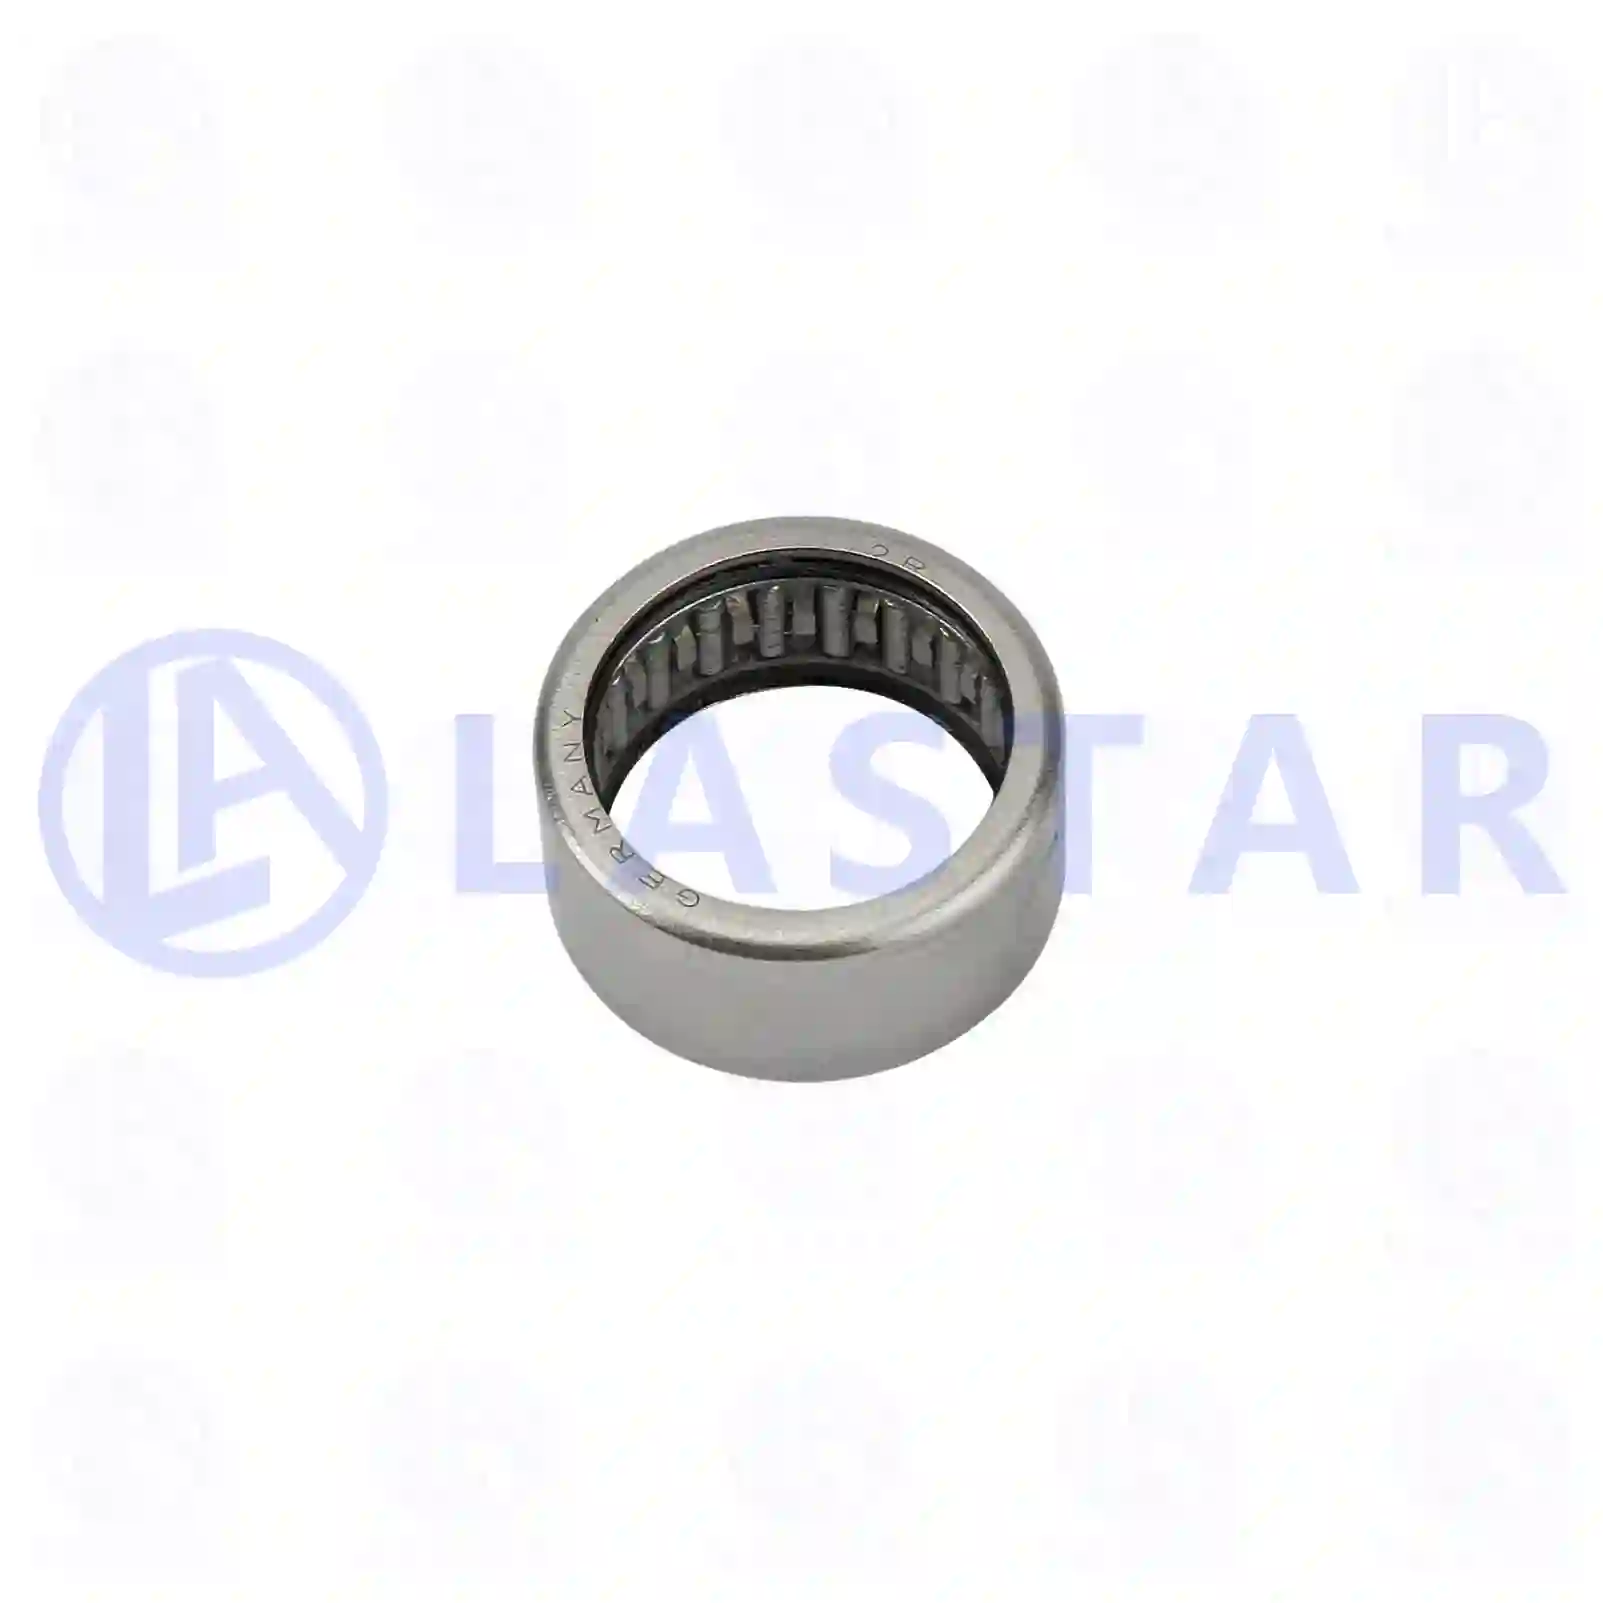 Needle bearing, 77724835, 368956, , ||  77724835 Lastar Spare Part | Truck Spare Parts, Auotomotive Spare Parts Needle bearing, 77724835, 368956, , ||  77724835 Lastar Spare Part | Truck Spare Parts, Auotomotive Spare Parts